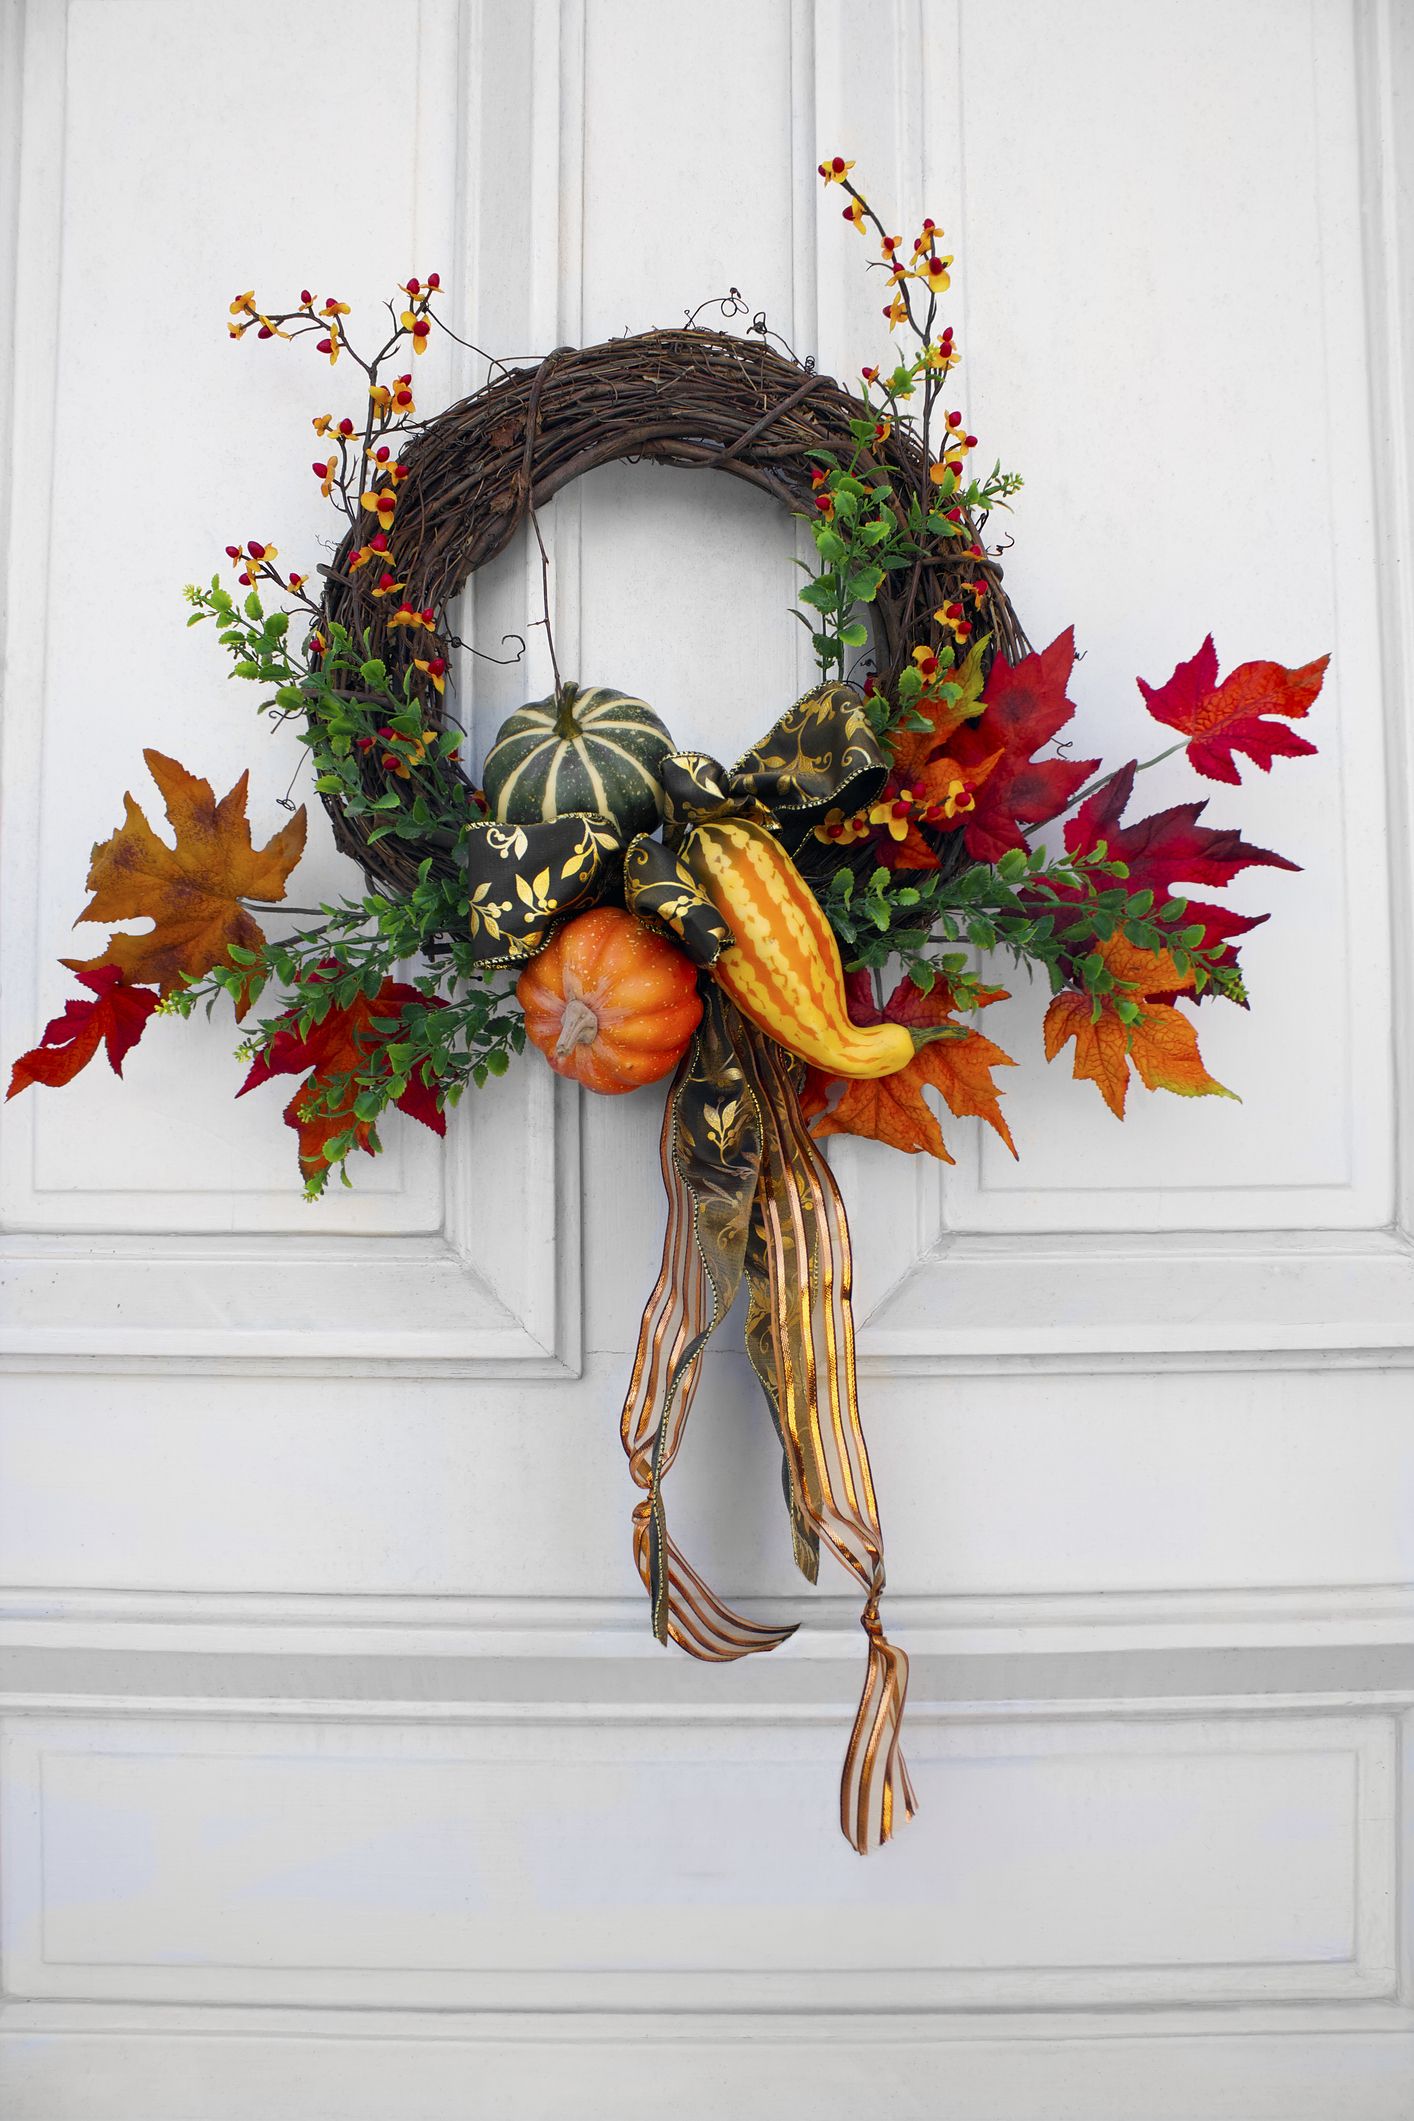 How to make a fall wreath - The House That Lars Built